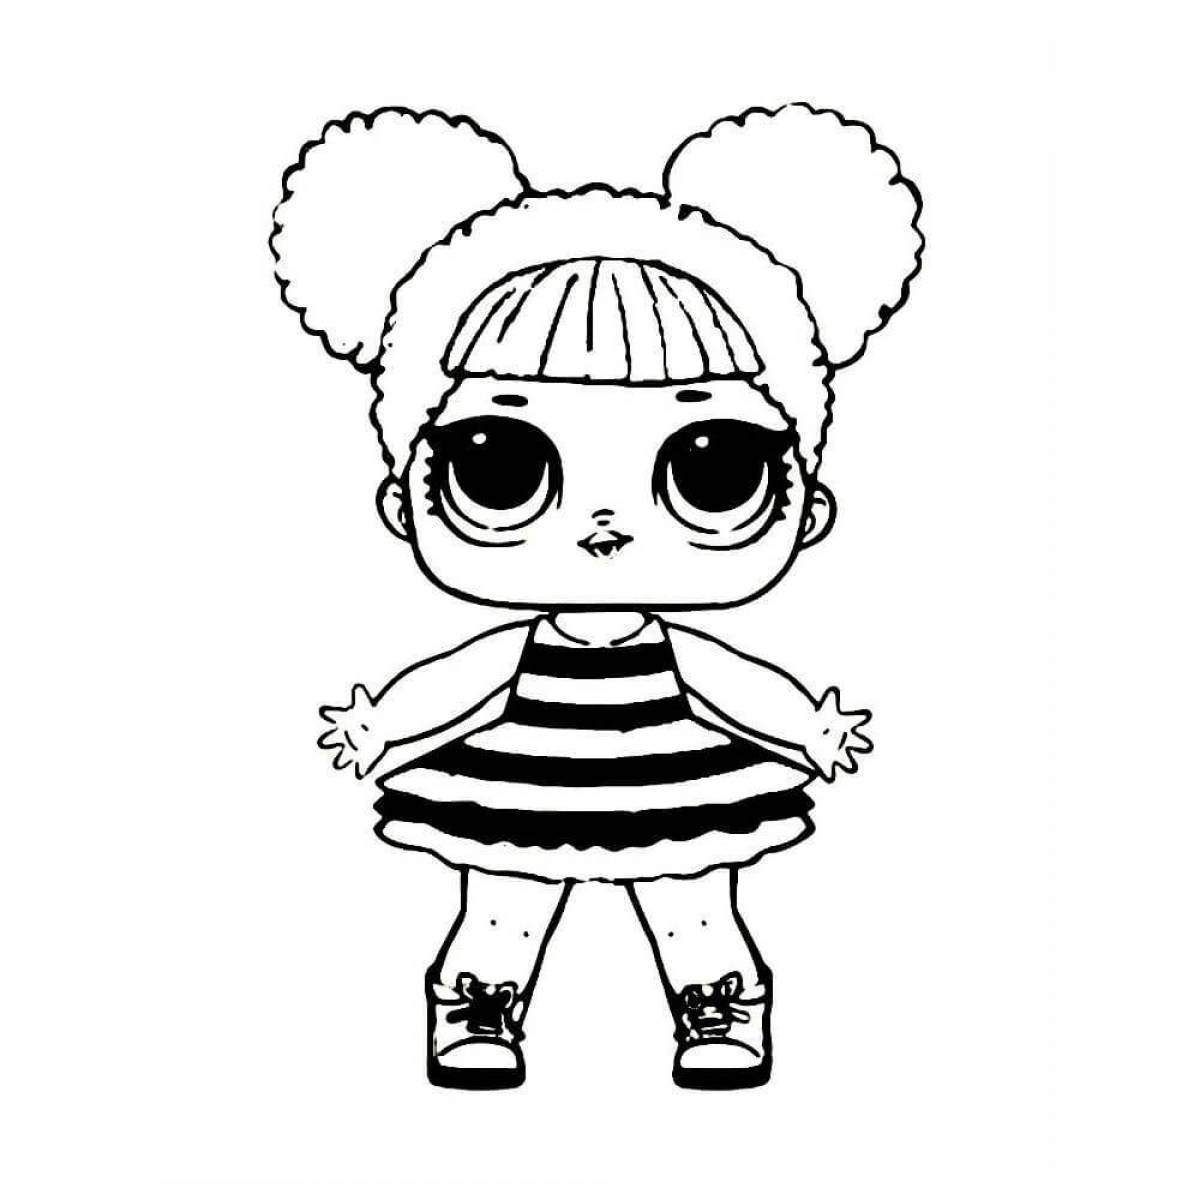 Wonderful lola dolls coloring pages for kids